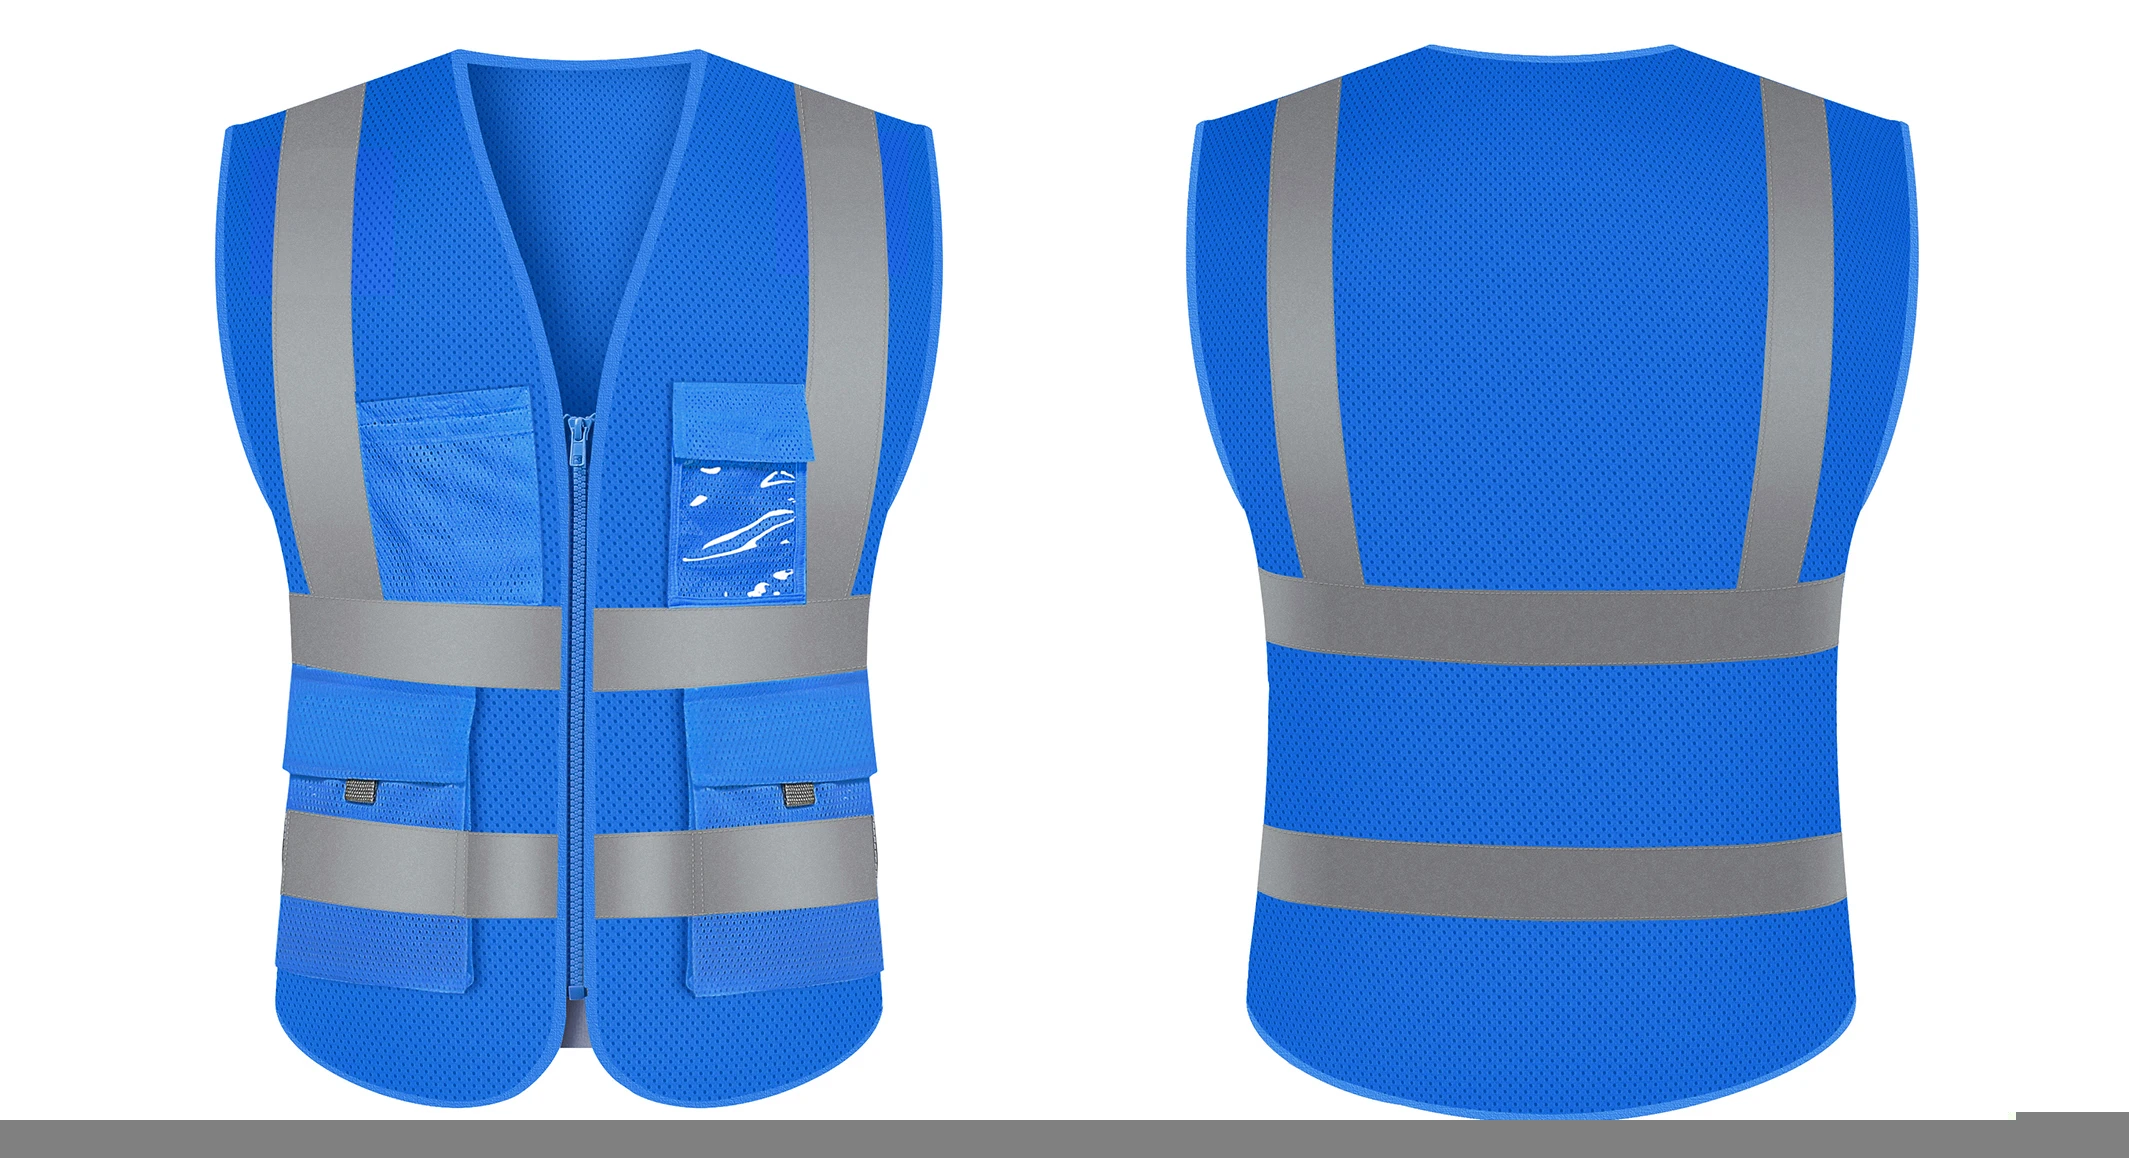 Reflective Tape Jacket Strip Mesh Fabric Construction Security Safety Vest Reflective Clothing